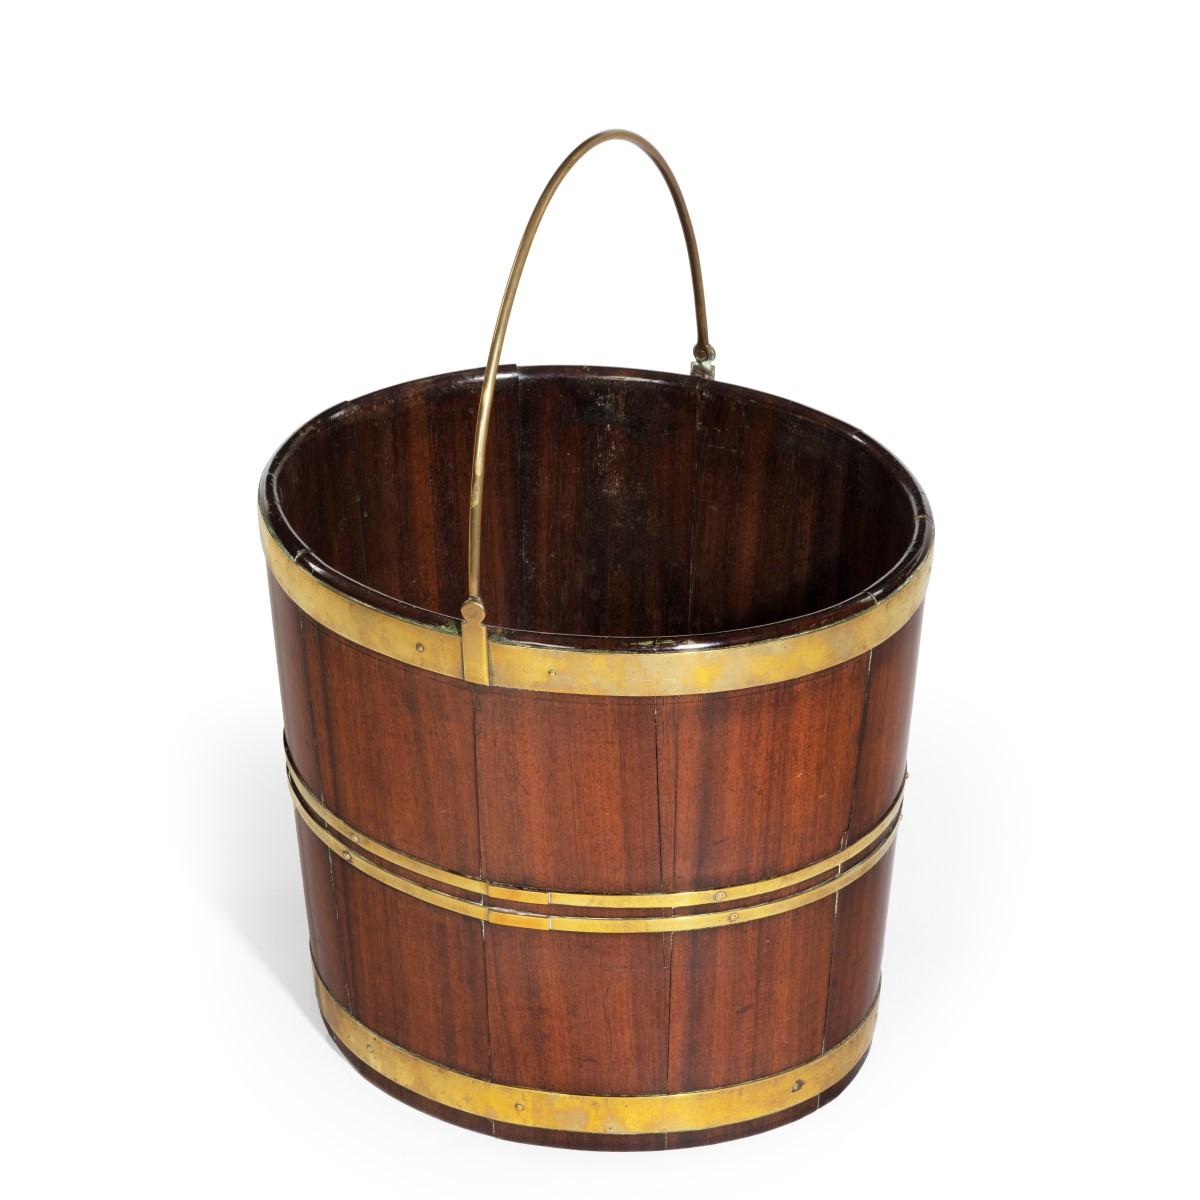 A late George III brass bound bucket, of oval shape with the mahogany timbers held by brass bands and with a hinged brass handle. English, circa 1810.
     